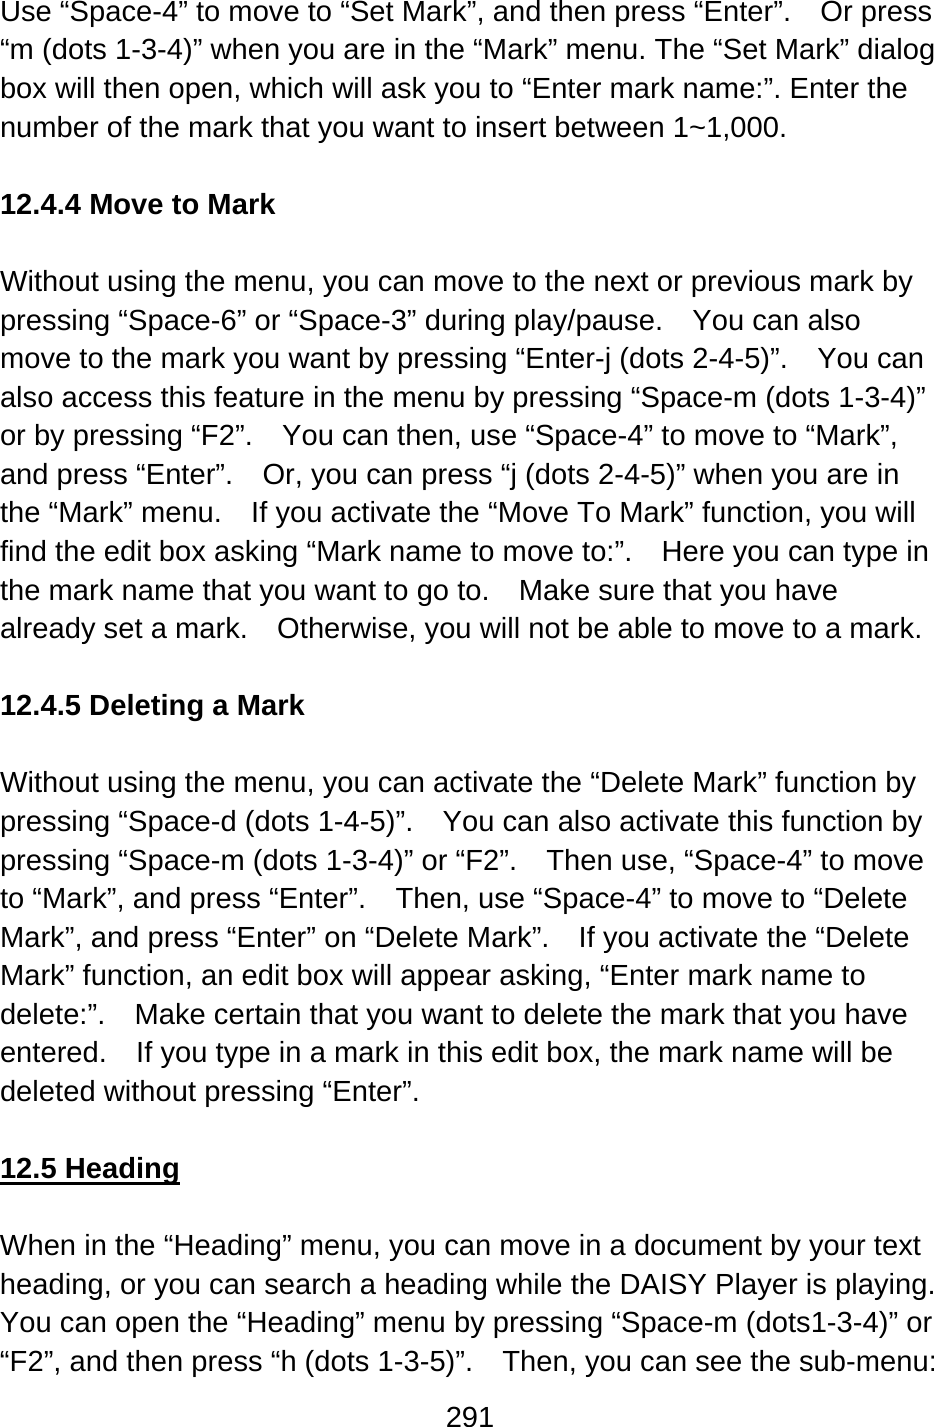 291  Use “Space-4” to move to “Set Mark”, and then press “Enter”.    Or press “m (dots 1-3-4)” when you are in the “Mark” menu. The “Set Mark” dialog box will then open, which will ask you to “Enter mark name:”. Enter the number of the mark that you want to insert between 1~1,000.  12.4.4 Move to Mark  Without using the menu, you can move to the next or previous mark by pressing “Space-6” or “Space-3” during play/pause.    You can also move to the mark you want by pressing “Enter-j (dots 2-4-5)”.    You can also access this feature in the menu by pressing “Space-m (dots 1-3-4)” or by pressing “F2”.    You can then, use “Space-4” to move to “Mark”, and press “Enter”.    Or, you can press “j (dots 2-4-5)” when you are in the “Mark” menu.    If you activate the “Move To Mark” function, you will find the edit box asking “Mark name to move to:”.    Here you can type in the mark name that you want to go to.    Make sure that you have already set a mark.    Otherwise, you will not be able to move to a mark.  12.4.5 Deleting a Mark  Without using the menu, you can activate the “Delete Mark” function by pressing “Space-d (dots 1-4-5)”.    You can also activate this function by pressing “Space-m (dots 1-3-4)” or “F2”.    Then use, “Space-4” to move to “Mark”, and press “Enter”.    Then, use “Space-4” to move to “Delete Mark”, and press “Enter” on “Delete Mark”.    If you activate the “Delete Mark” function, an edit box will appear asking, “Enter mark name to delete:”.    Make certain that you want to delete the mark that you have entered.    If you type in a mark in this edit box, the mark name will be deleted without pressing “Enter”.  12.5 Heading  When in the “Heading” menu, you can move in a document by your text heading, or you can search a heading while the DAISY Player is playing.   You can open the “Heading” menu by pressing “Space-m (dots1-3-4)” or “F2”, and then press “h (dots 1-3-5)”.    Then, you can see the sub-menu: 